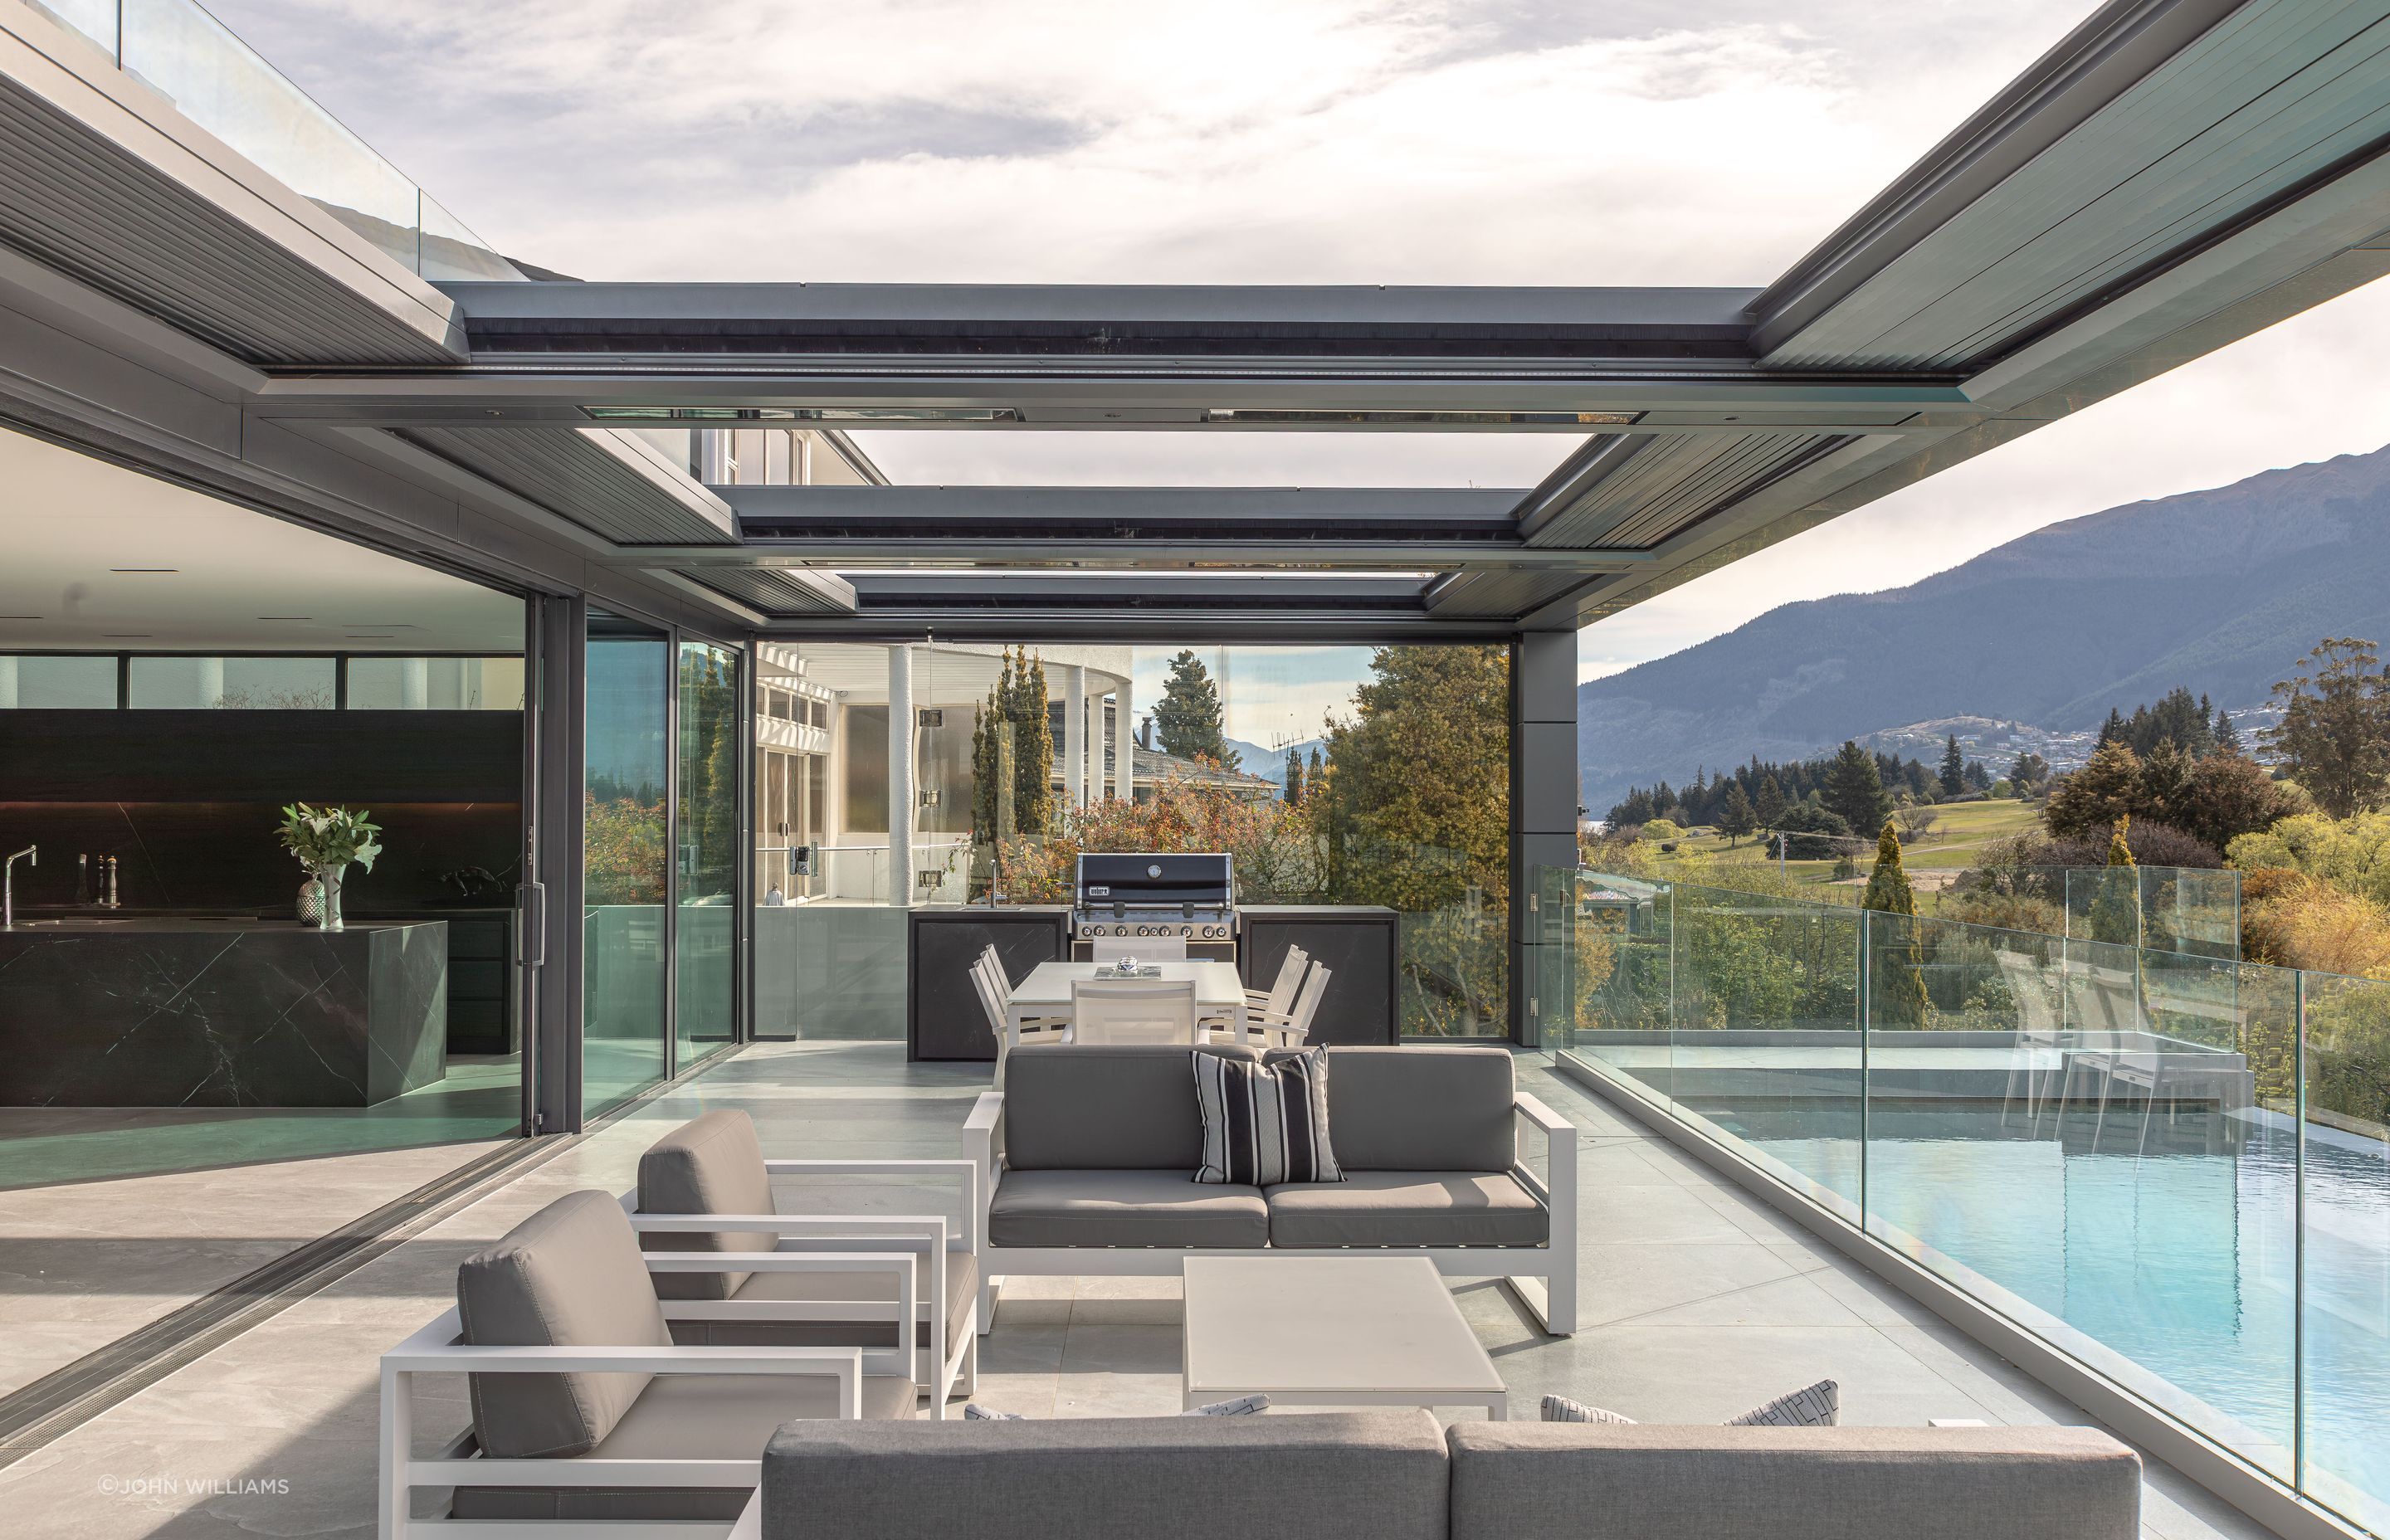 The living level flows freely onto an exterior pool terrace.